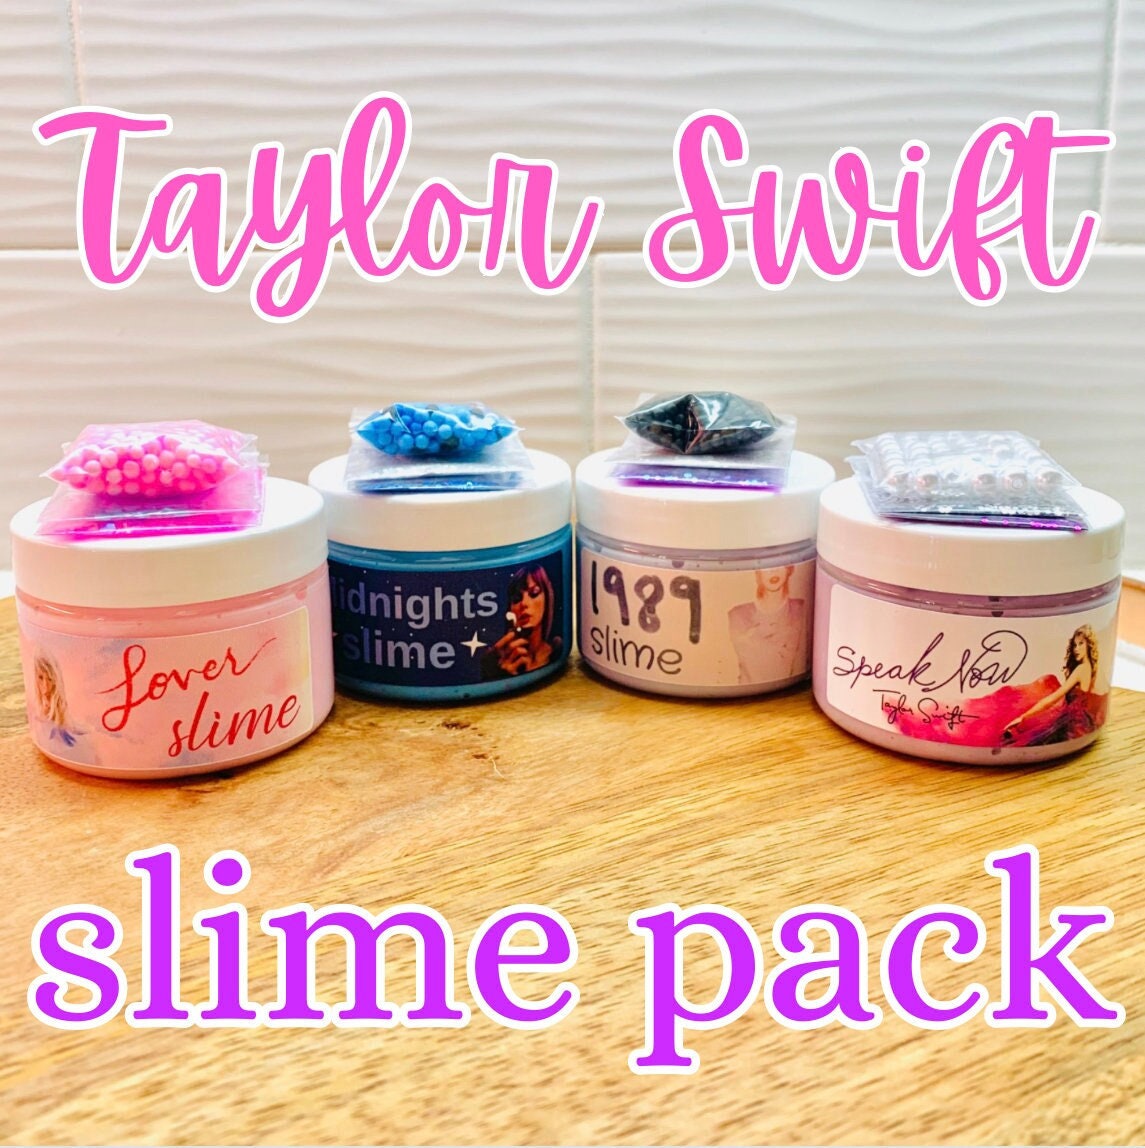 Mini Storage Containers for Slime, Crafts, Etc 